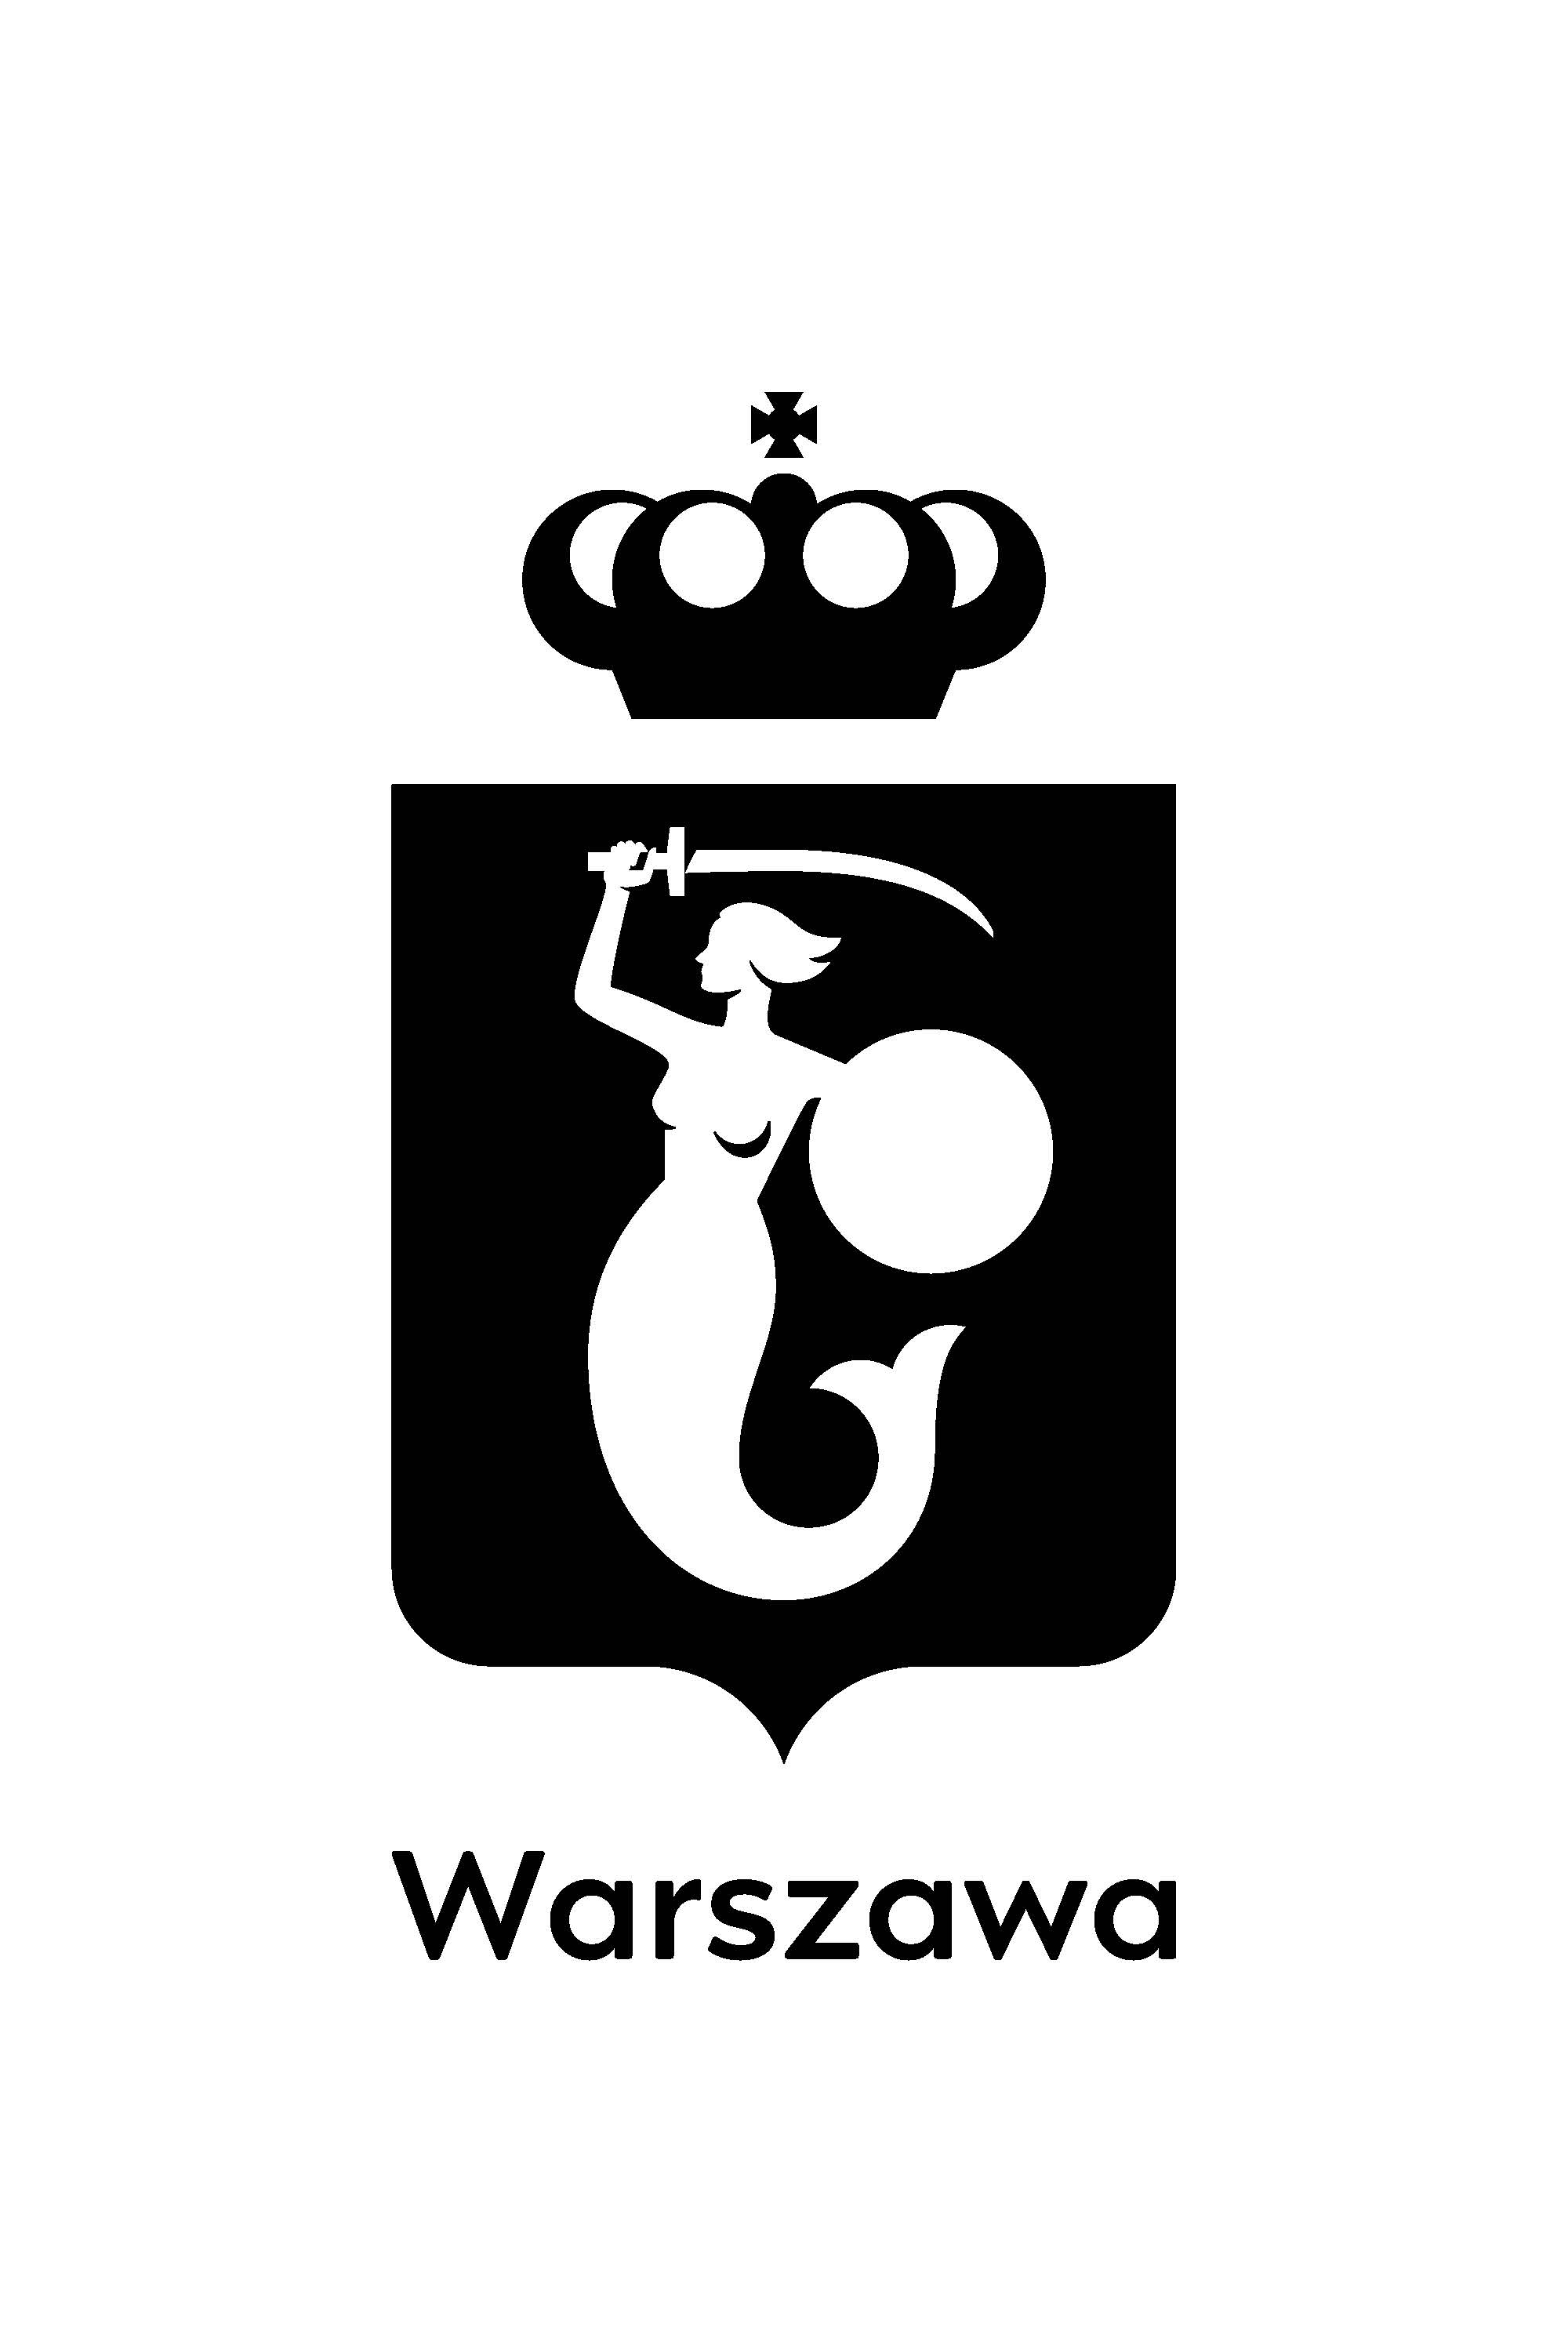 The Capital City of Warsaw